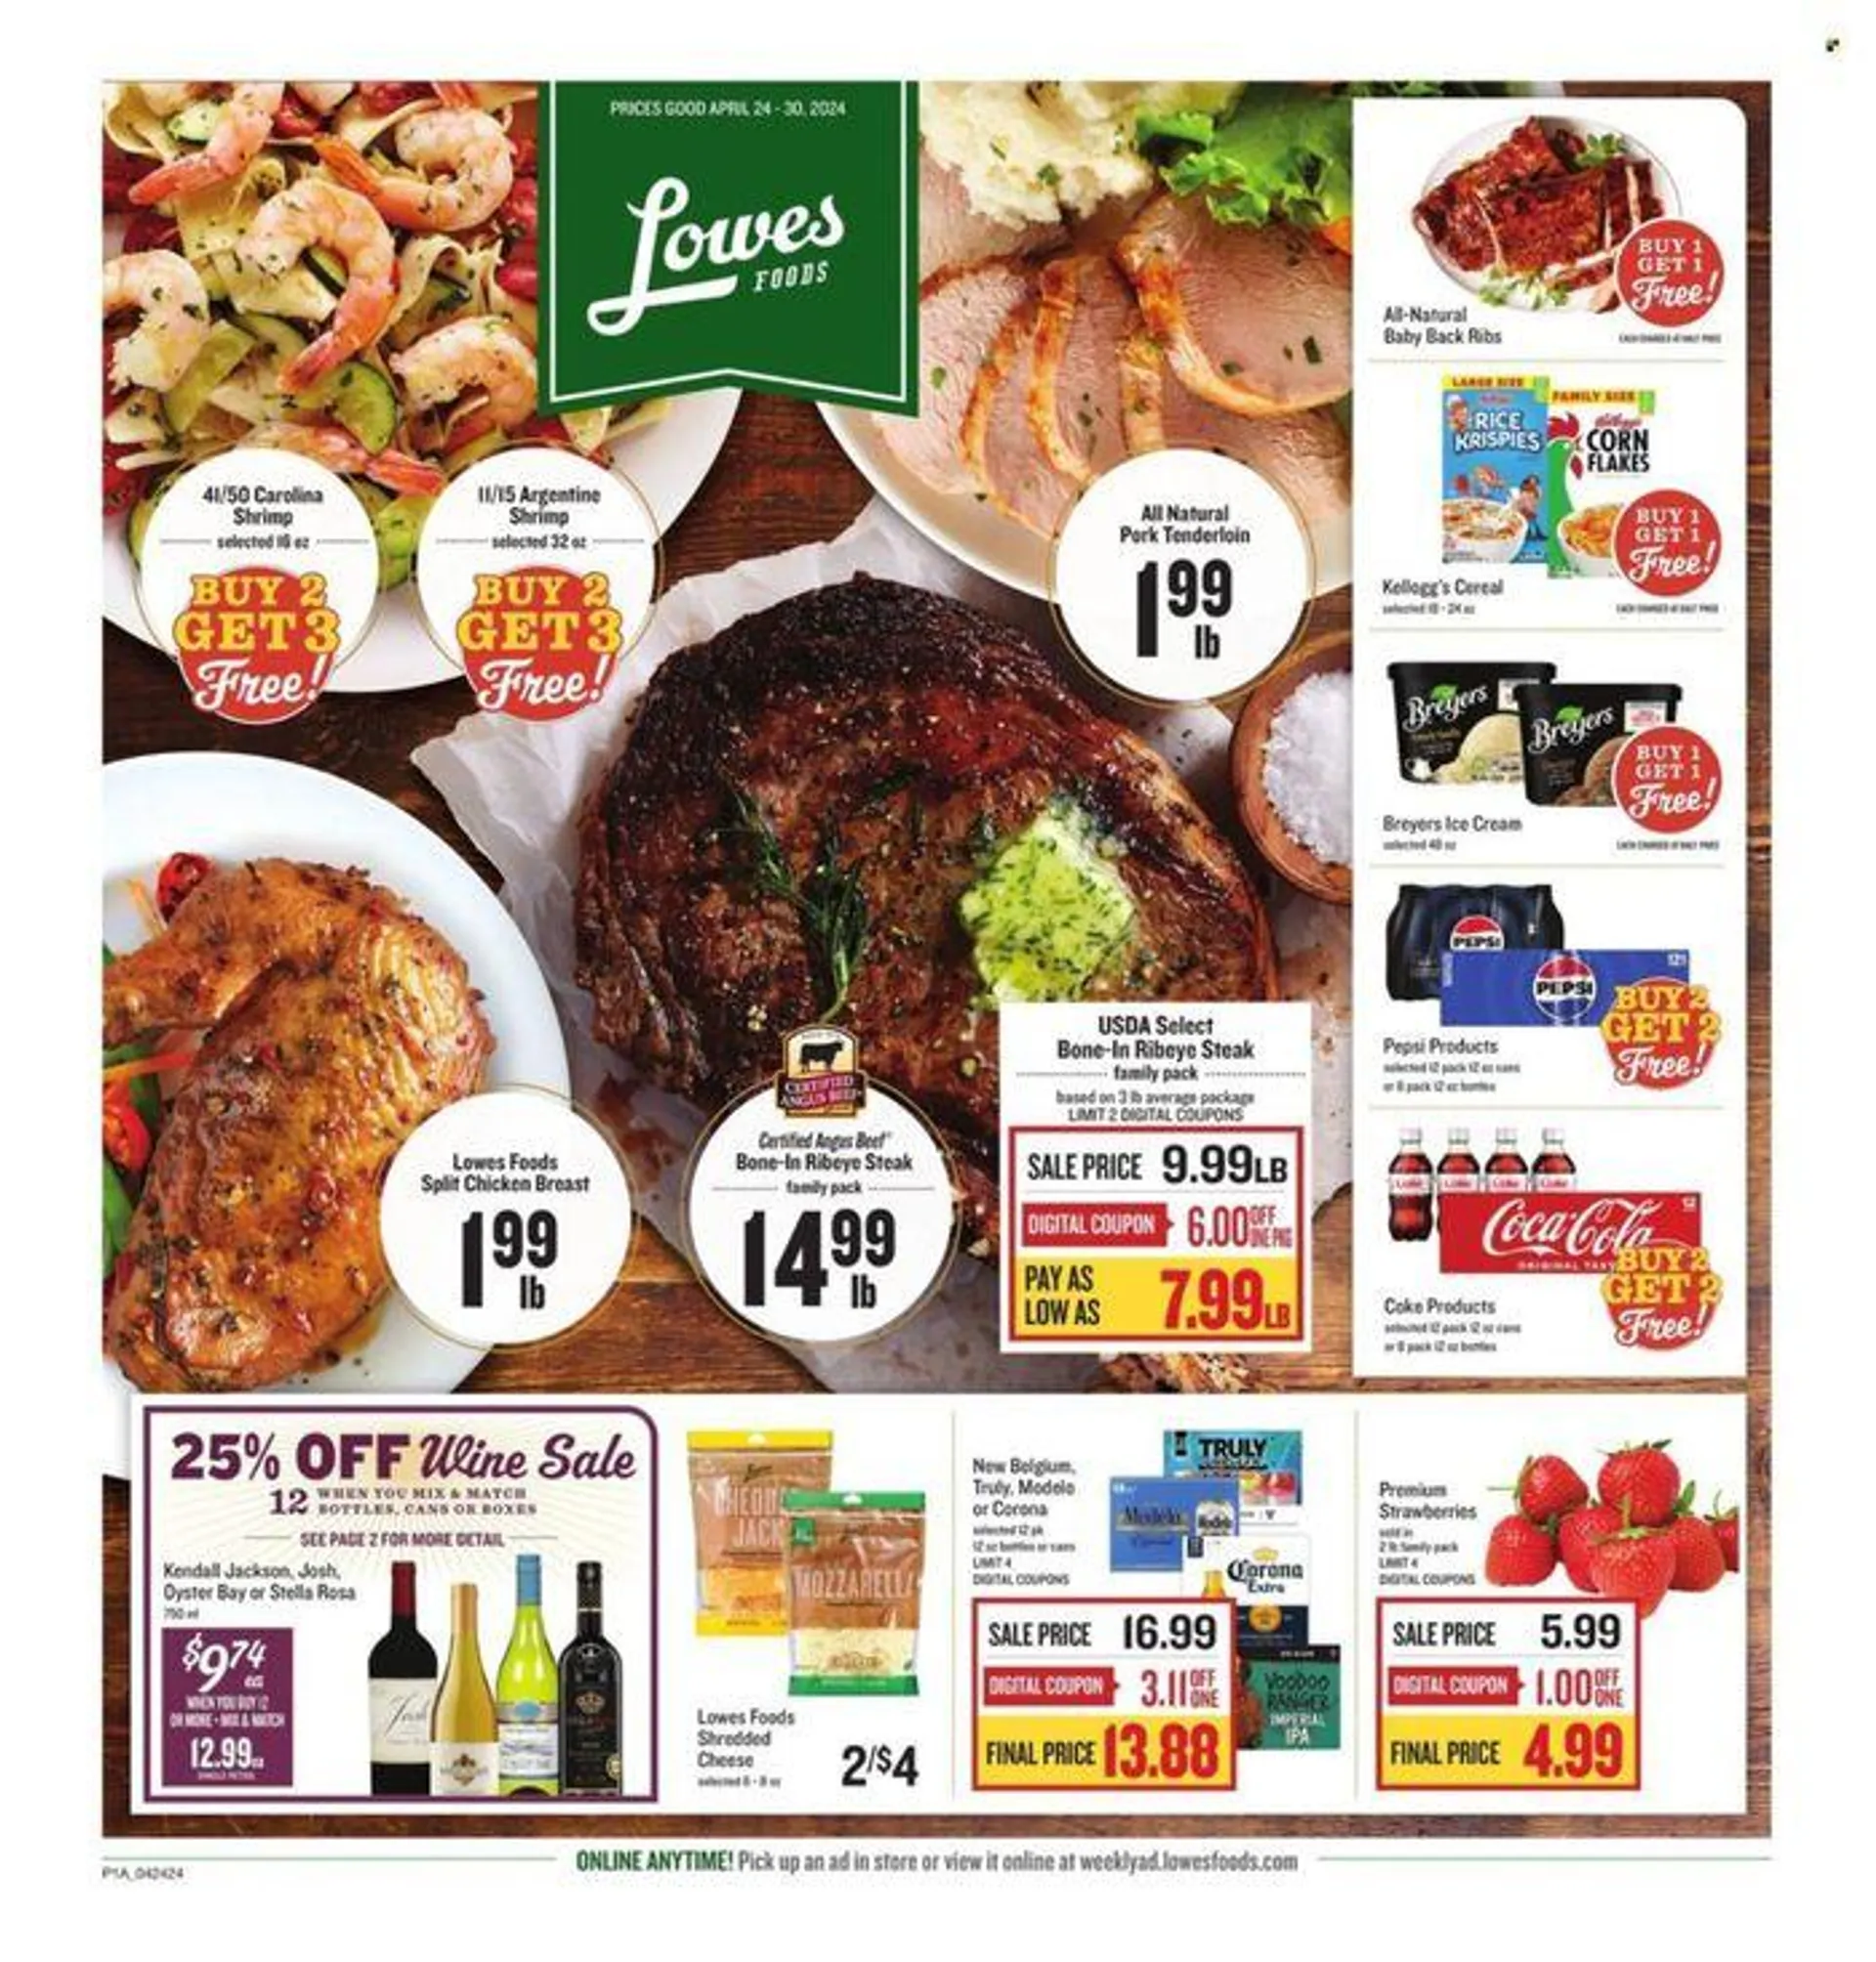 Lowes Foods Weekly ad - 1